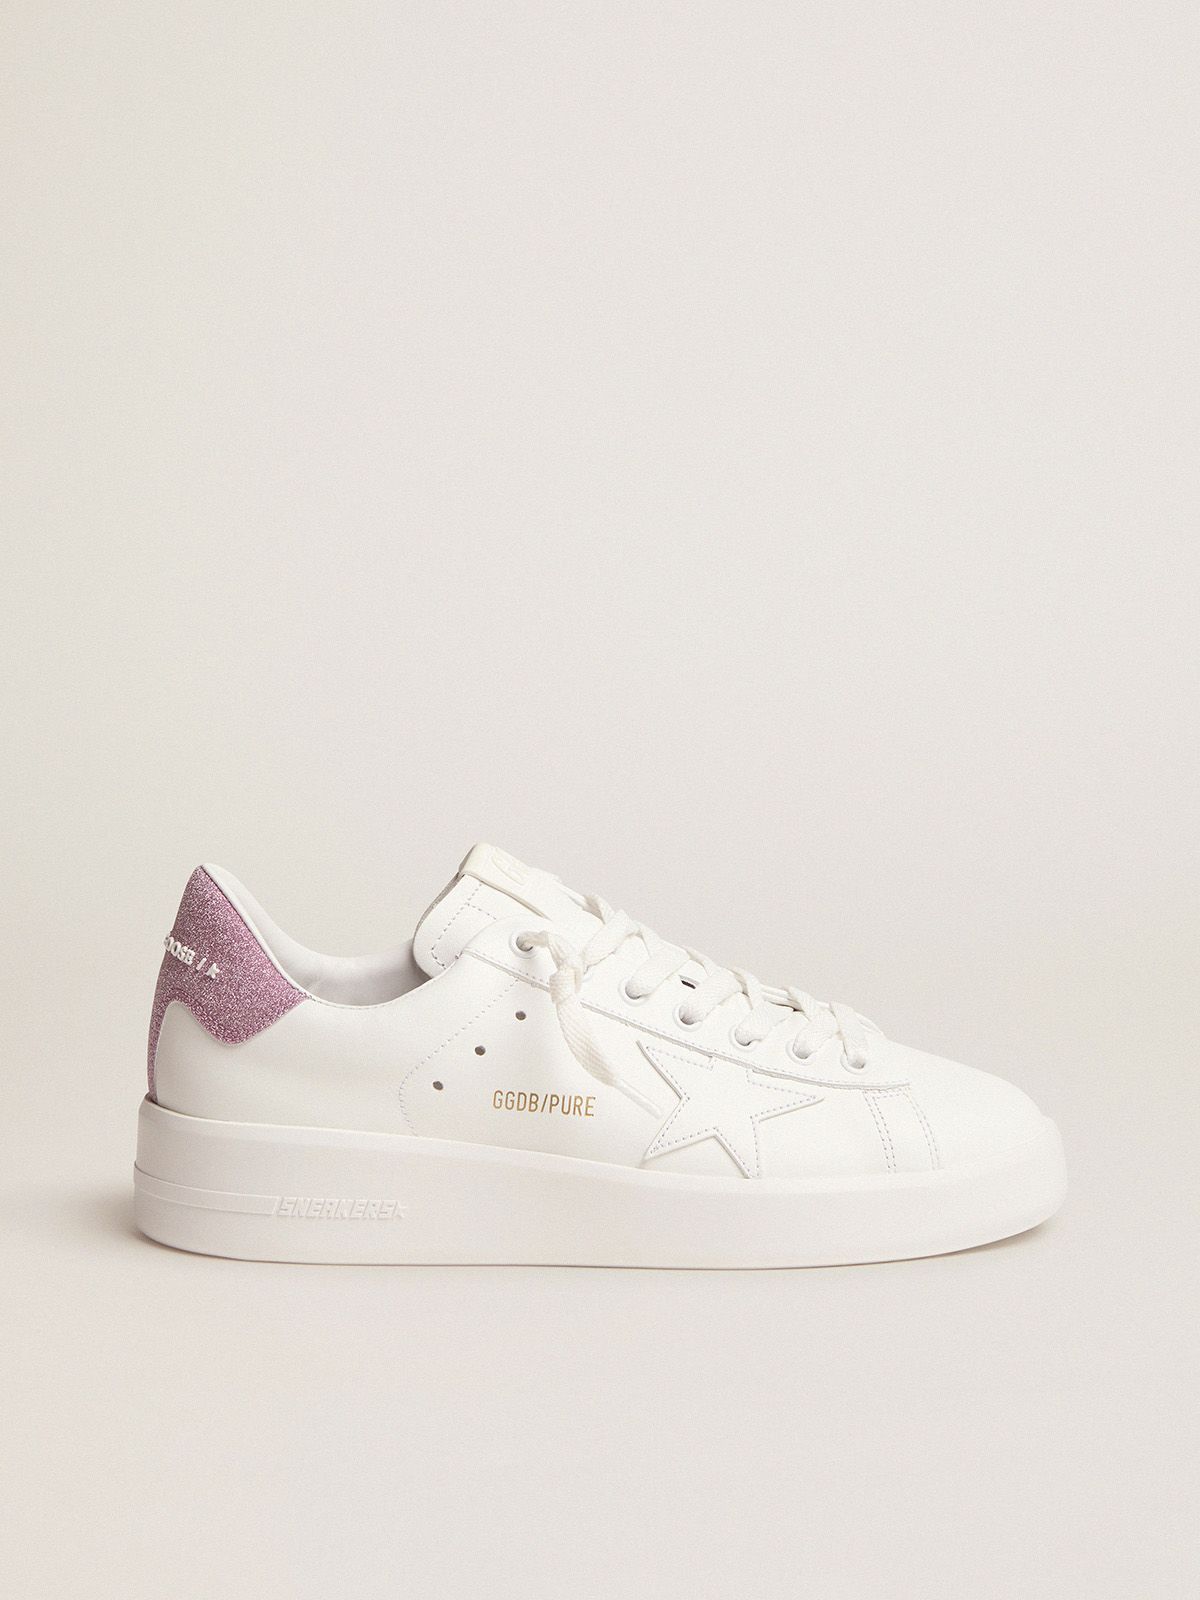 Purestar sneakers in white leather with pink glitter heel tab | 